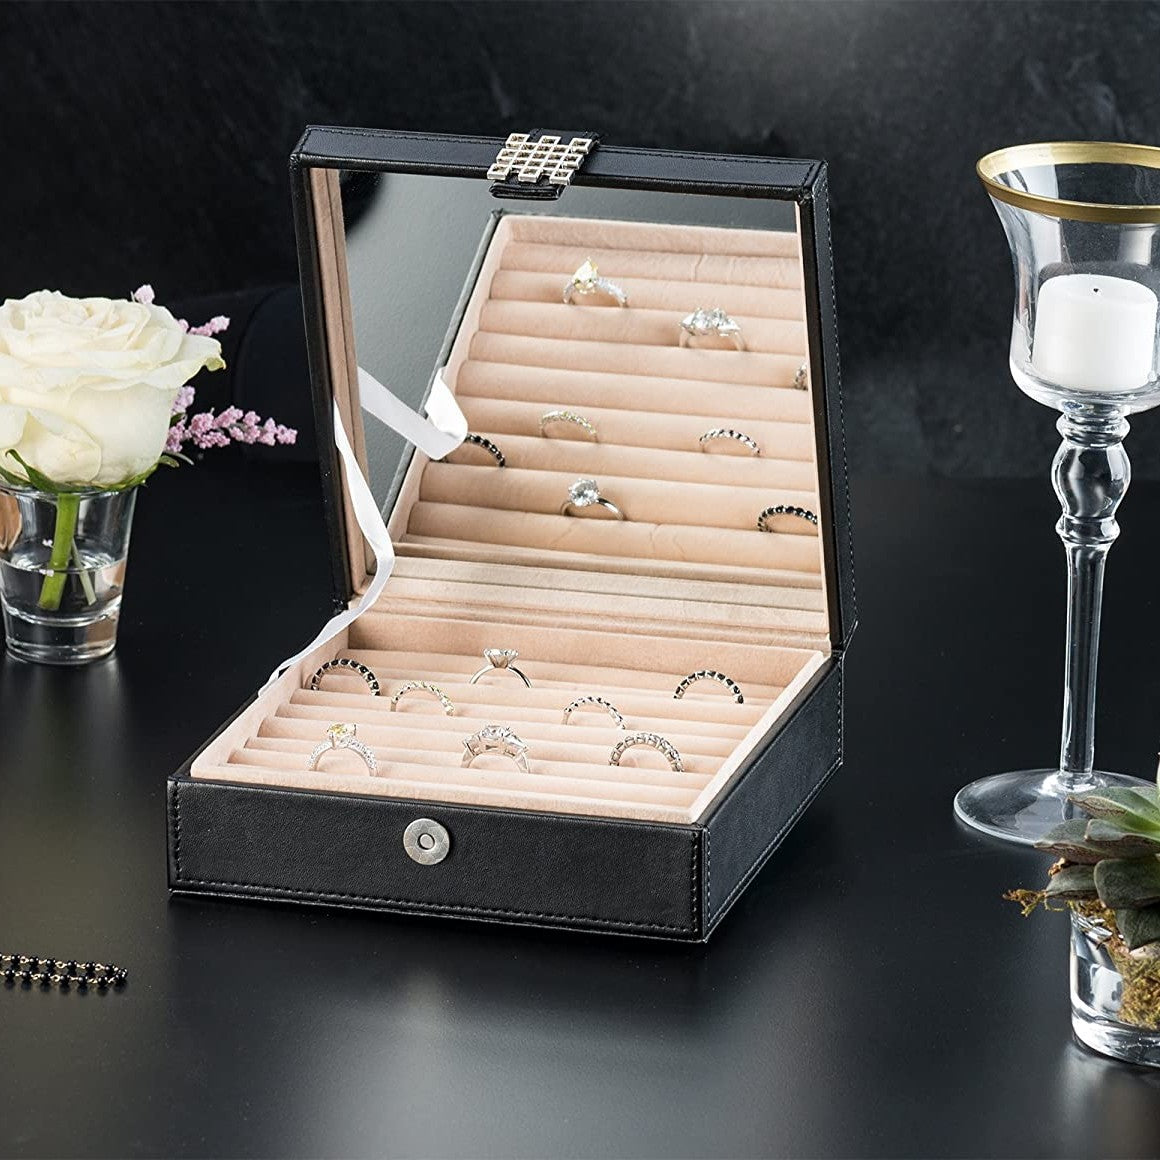 A stylish looking black ring box organizer with several rings inside and the lid is open. There is a candle in a glass and a white rose nearby.